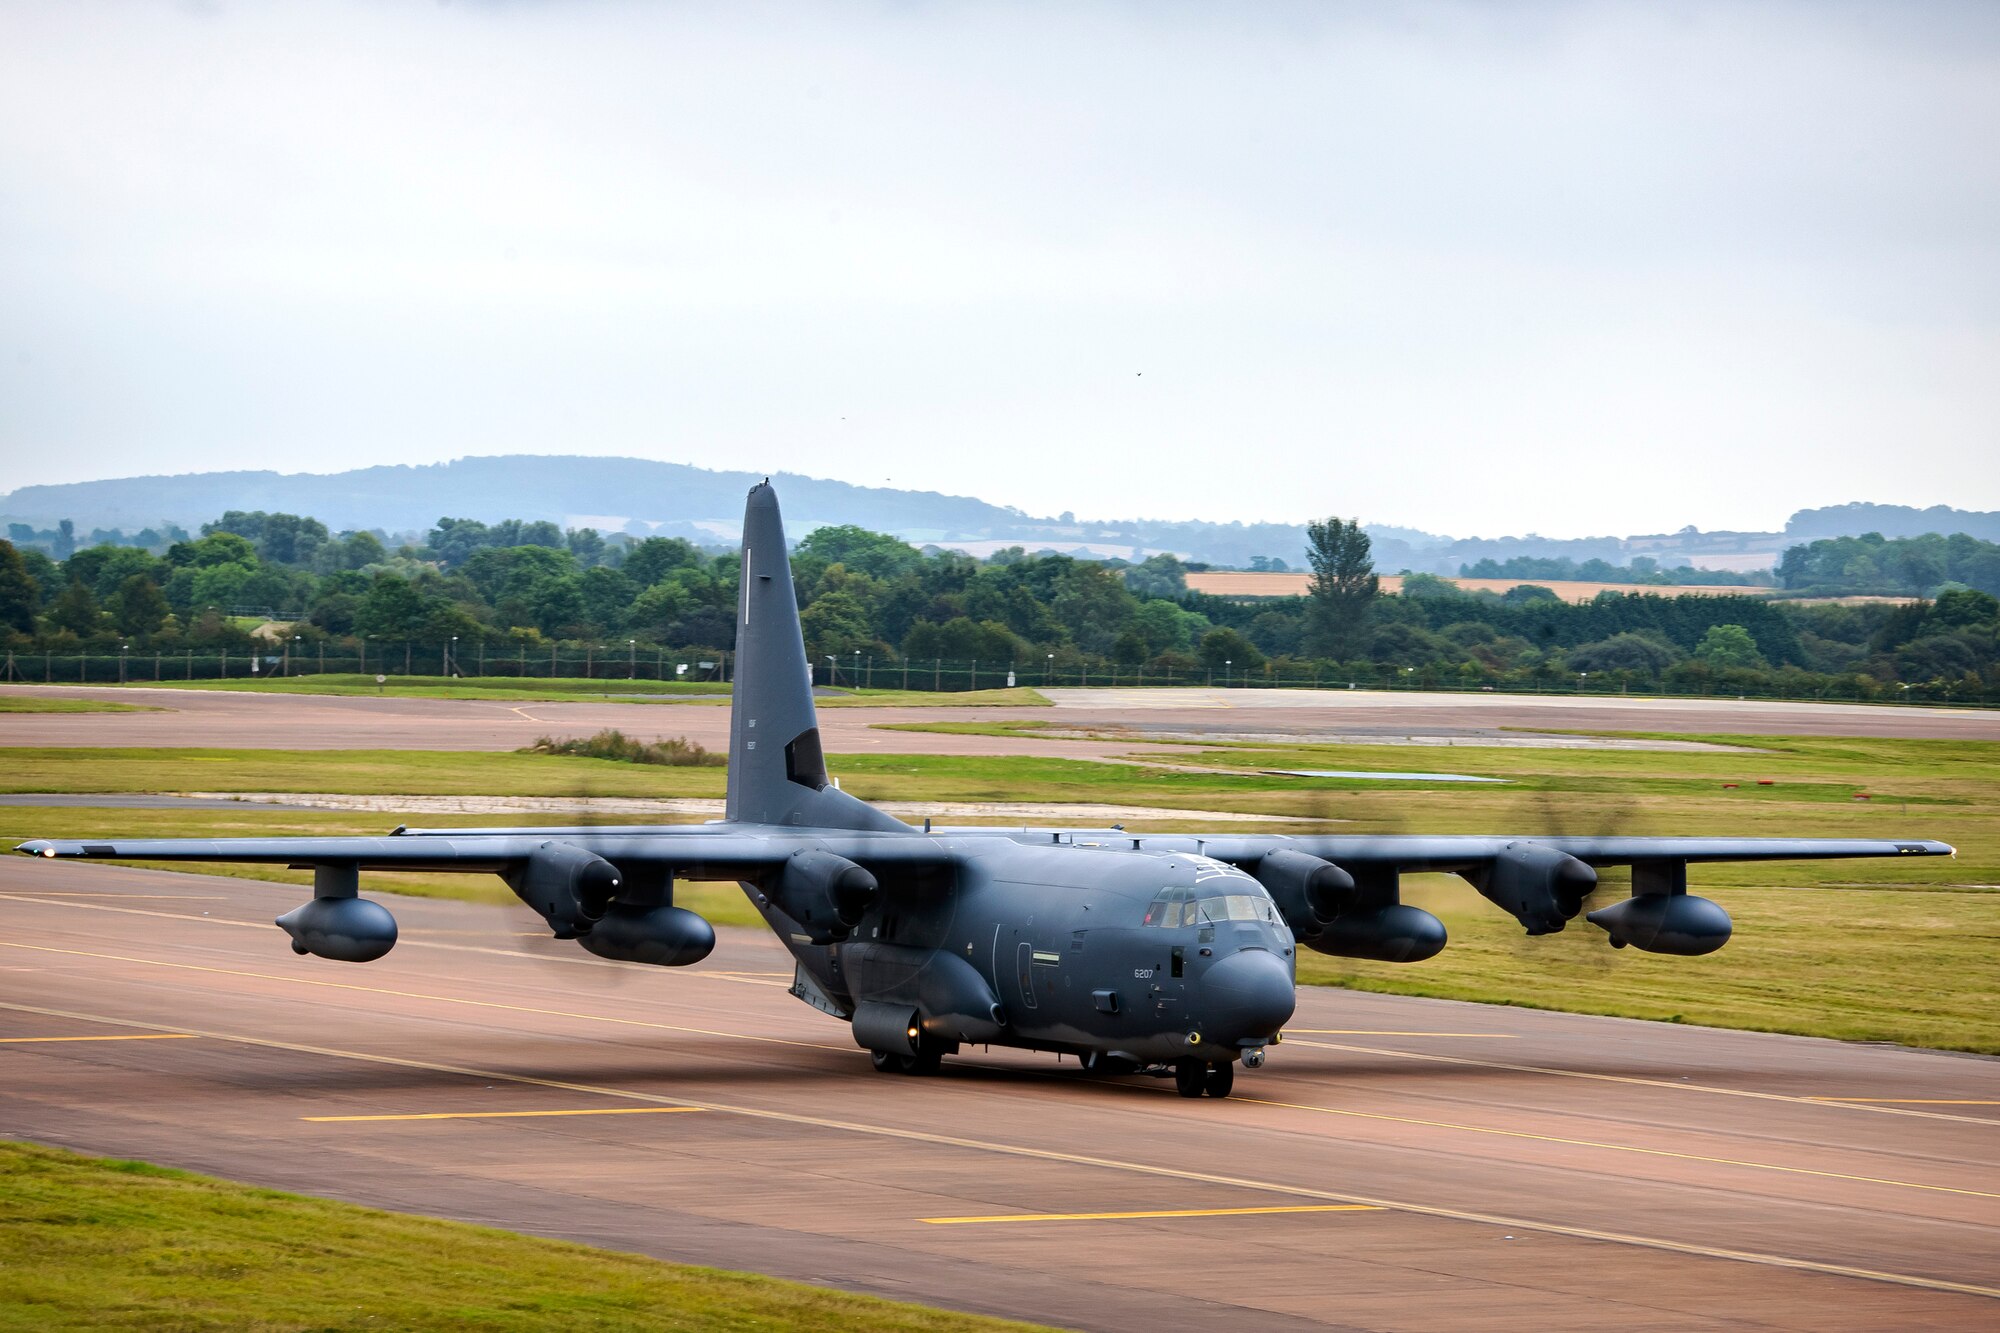 An MC-130J Commando II assigned to the 352d Special Operations Wing lands during an Agile Combat Employment exercise at RAF Fairford, England, Sept. 13, 2021. Airmen from the 501st Combat Support Wing, 100th Air Refueling Wing and 352d SOW partnered for an ACE exercise to test their overall readiness and lethality capabilities. ACE enables U.S. forces in Europe to operate from locations with varying levels of capacity and support. (U.S. Air Force photo by Senior Airman Eugene Oliver)